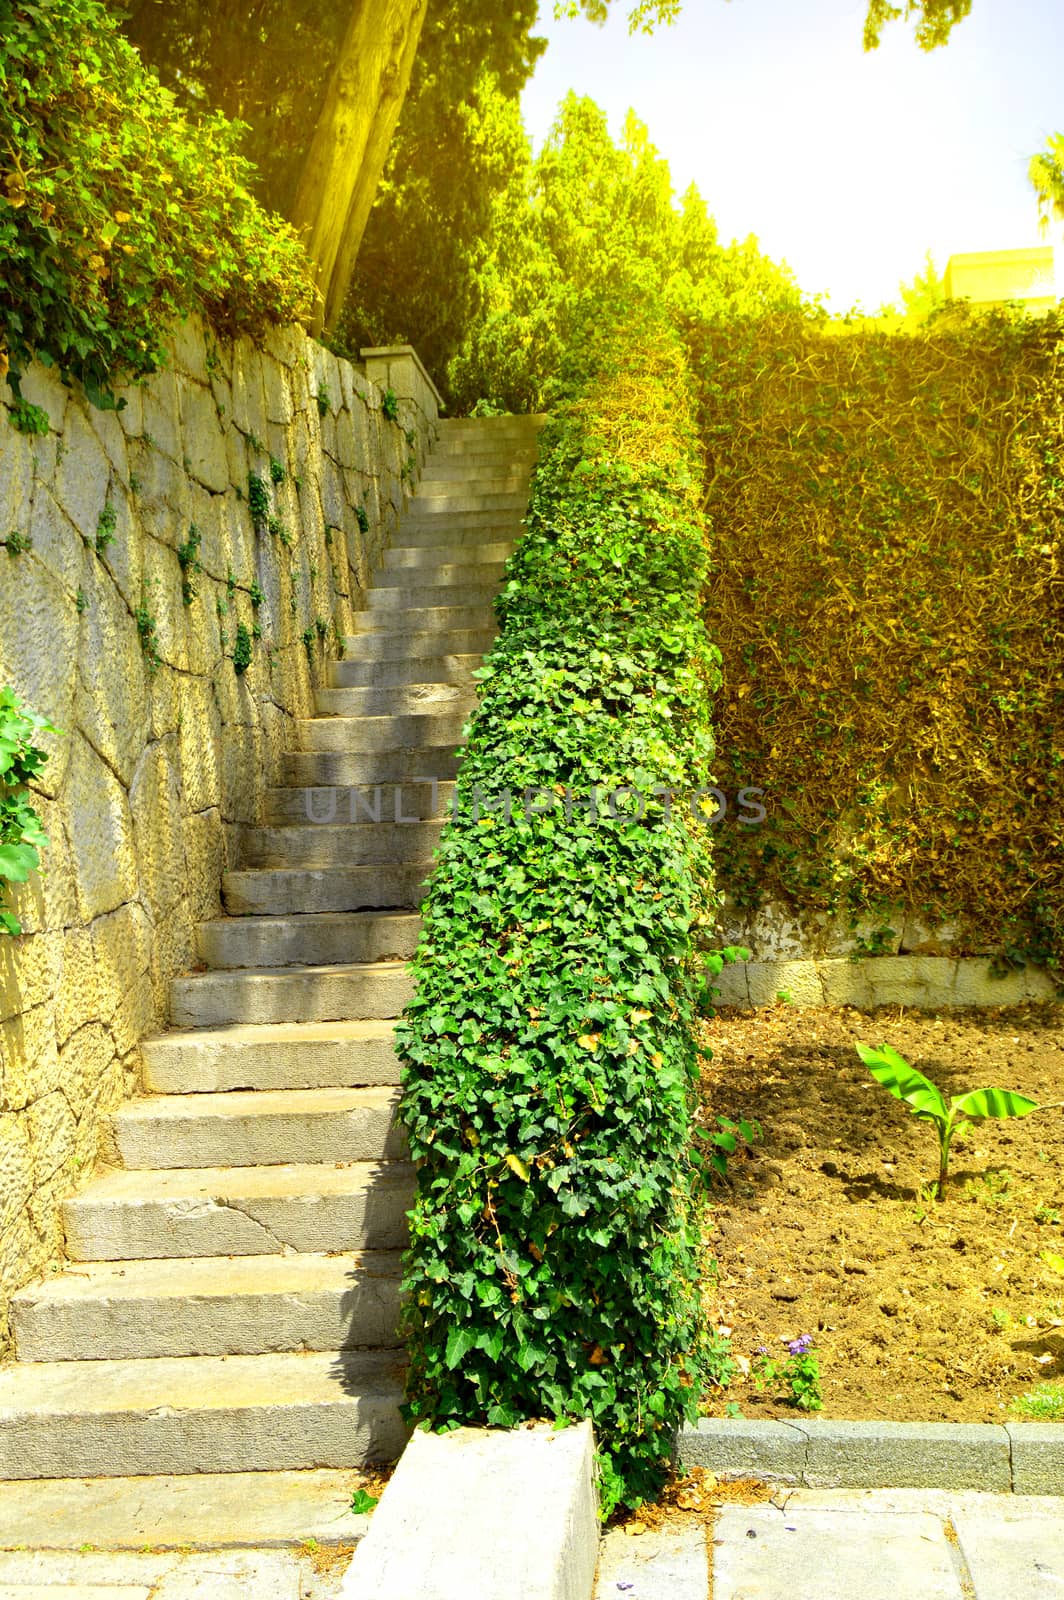 Beautiful stone staircase, steps leading up among the plants and trees in the Park.